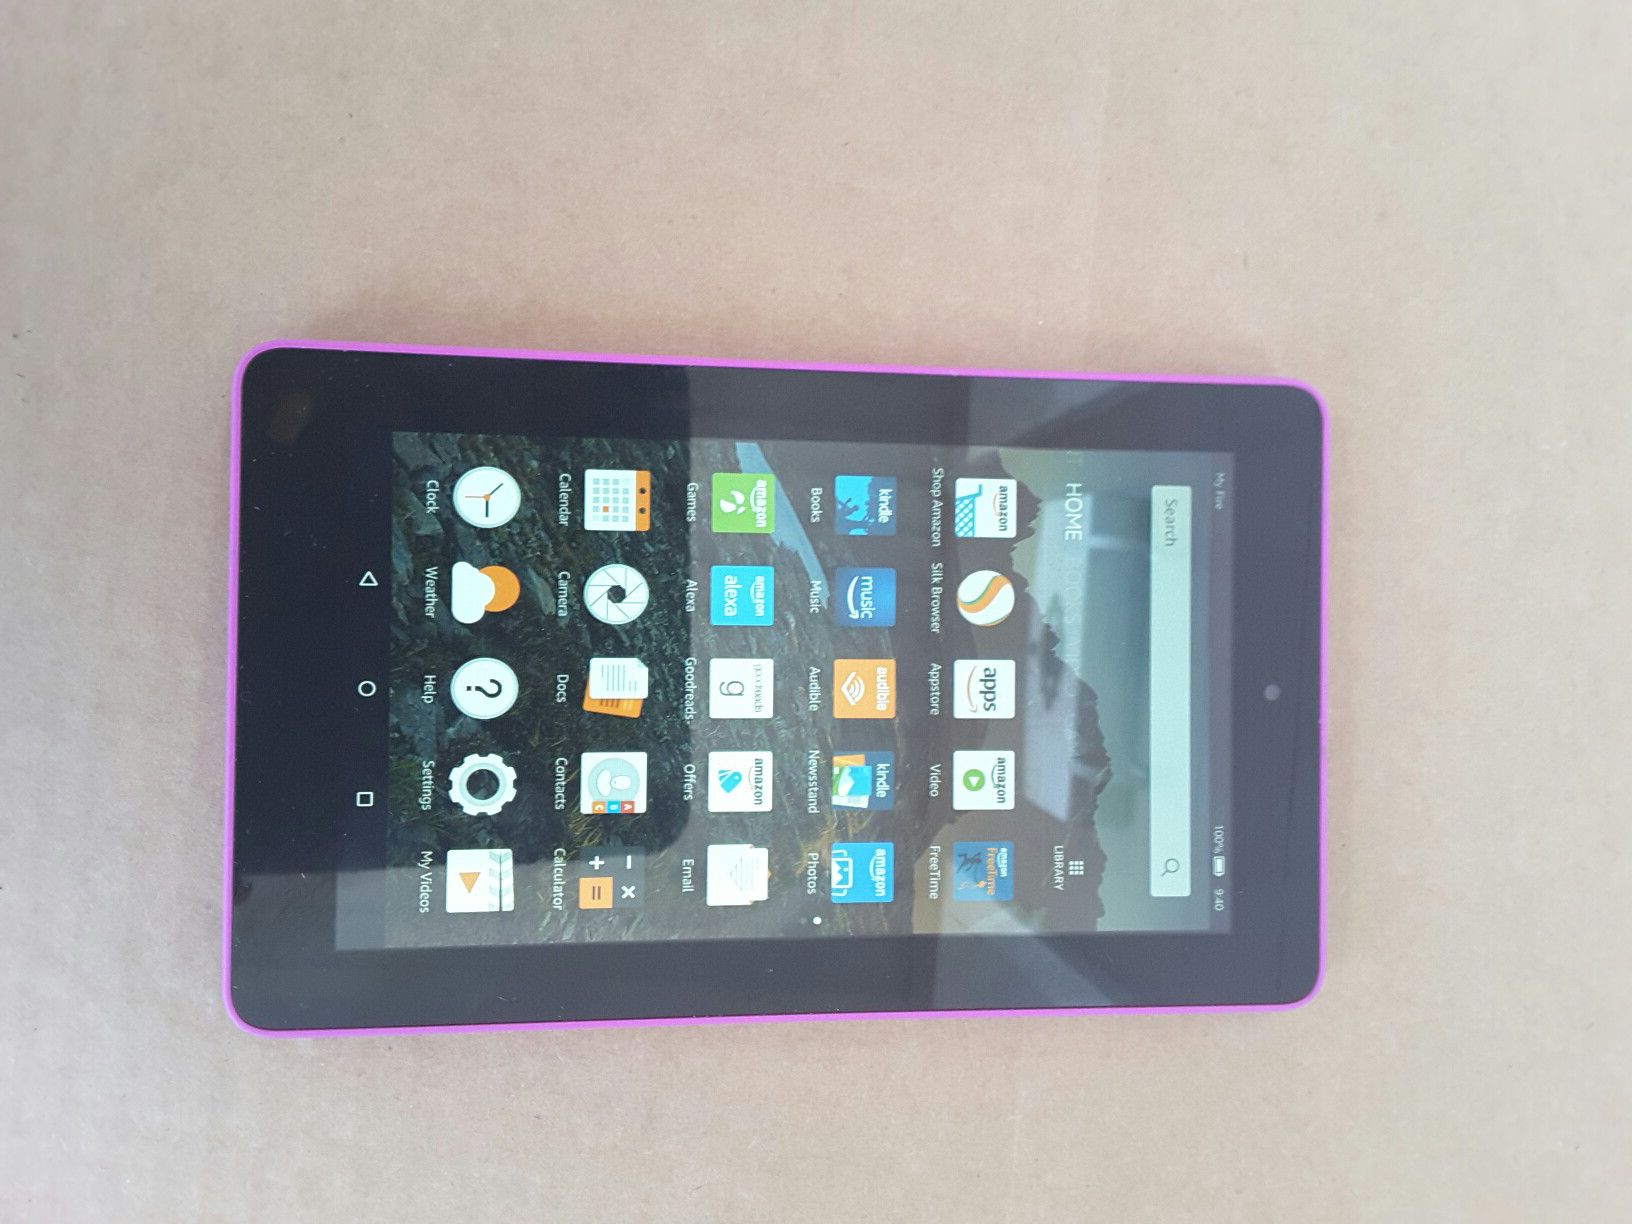 Tablet amazon Kindle fire hd-7 8gb 5th generation